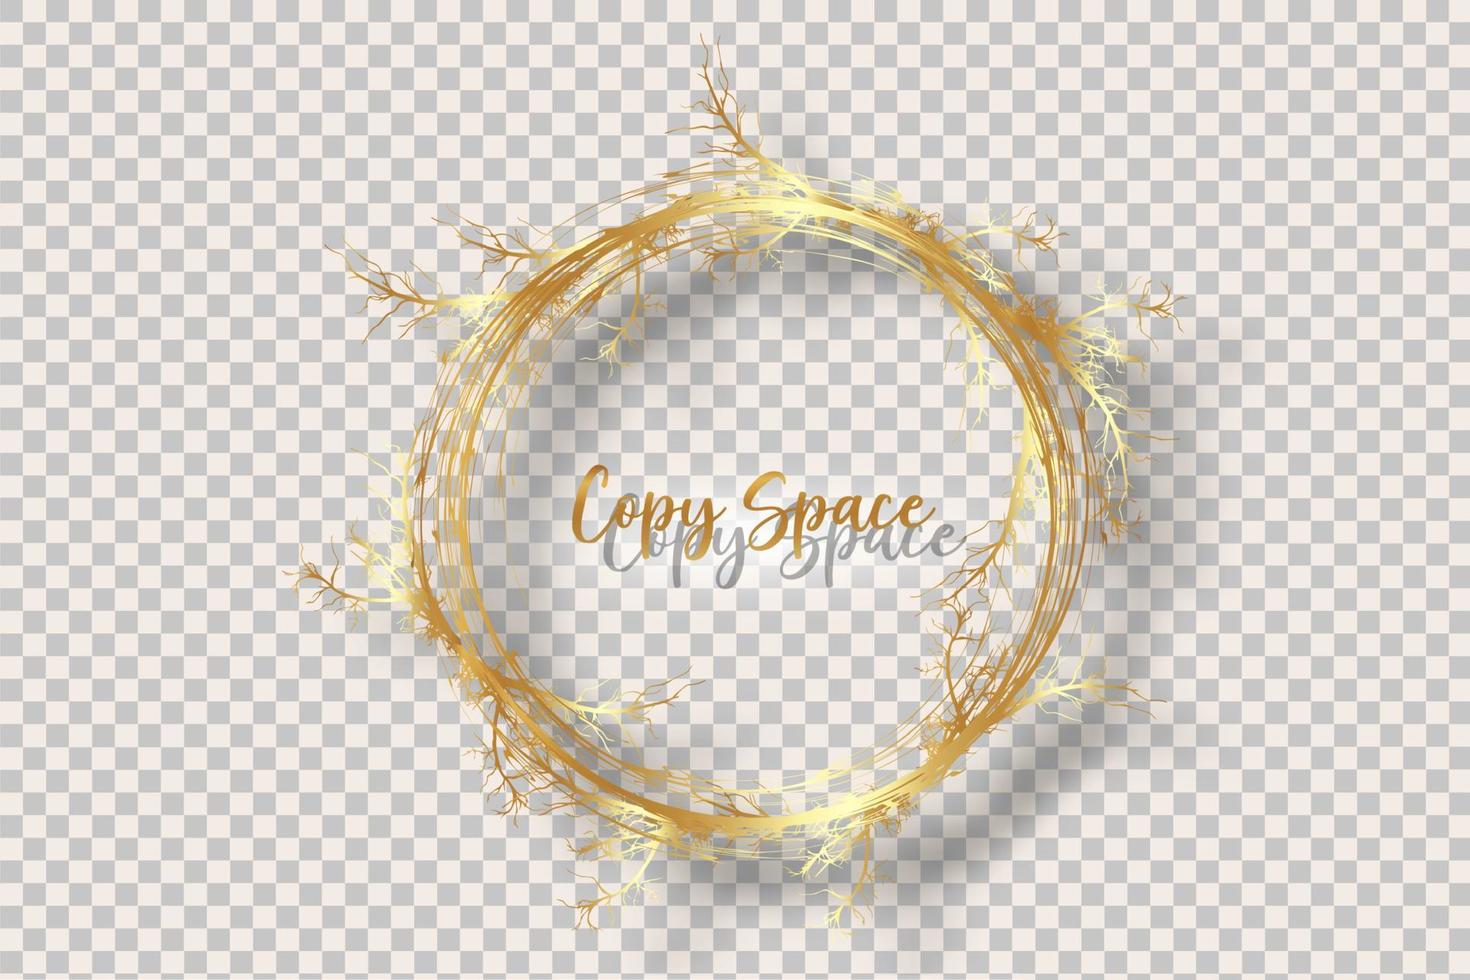 Gold wreath of branches, a realistic golden round frame border of twisted branches, copy space for text, luxury vector illustration isolated on transparent background